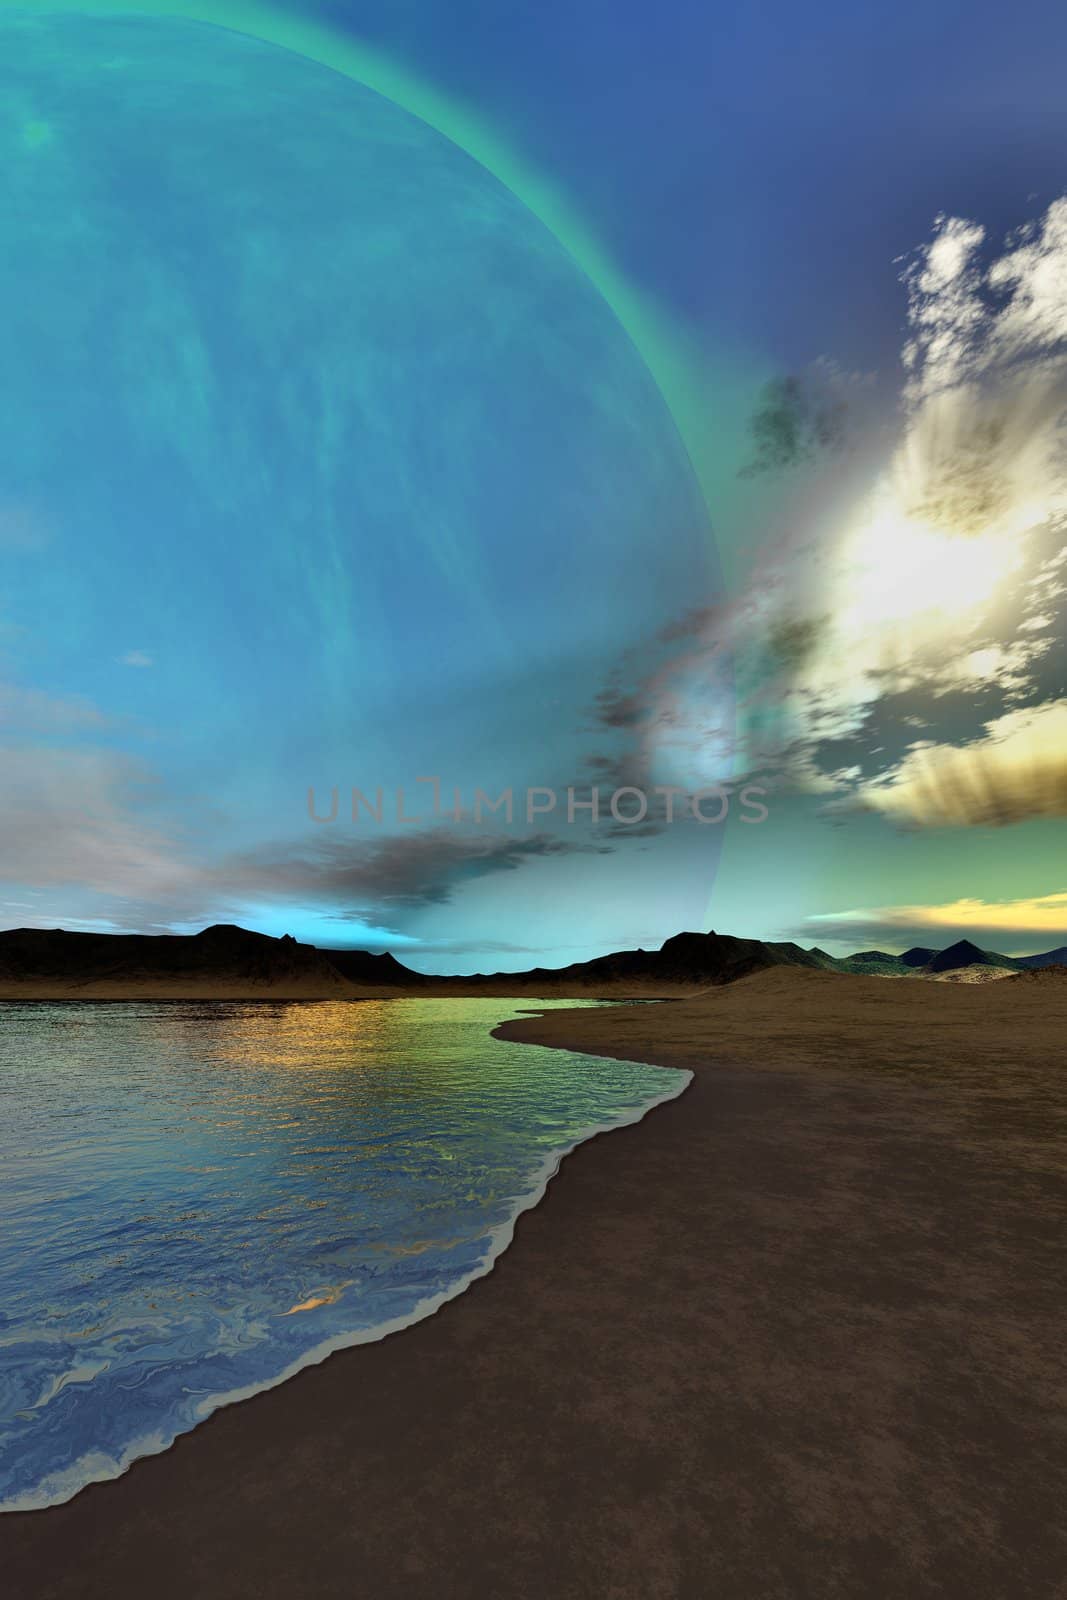 Beautiful skies shine down on this cosmic seascape.